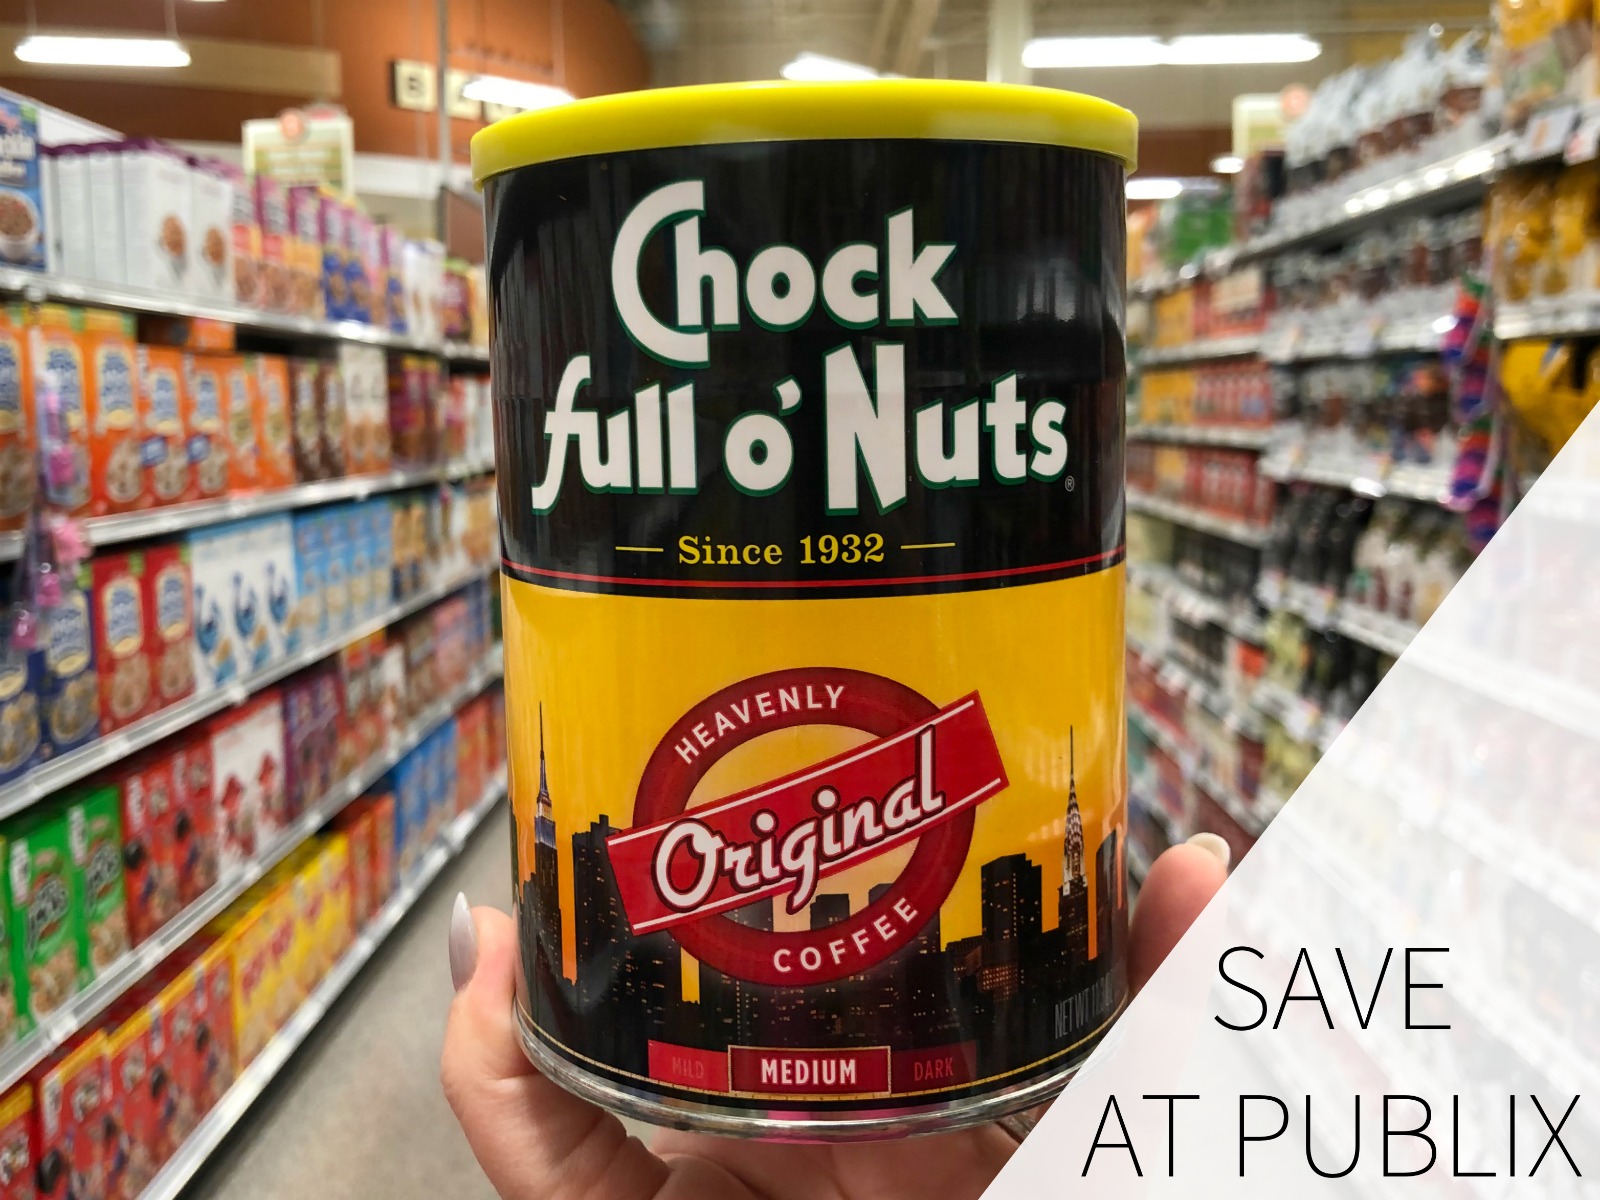 Enjoy The Perfect Cup Of Coffee At A Great Price - Save $2 On Chock full o’ Nuts® At Your Local Publix on I Heart Publix